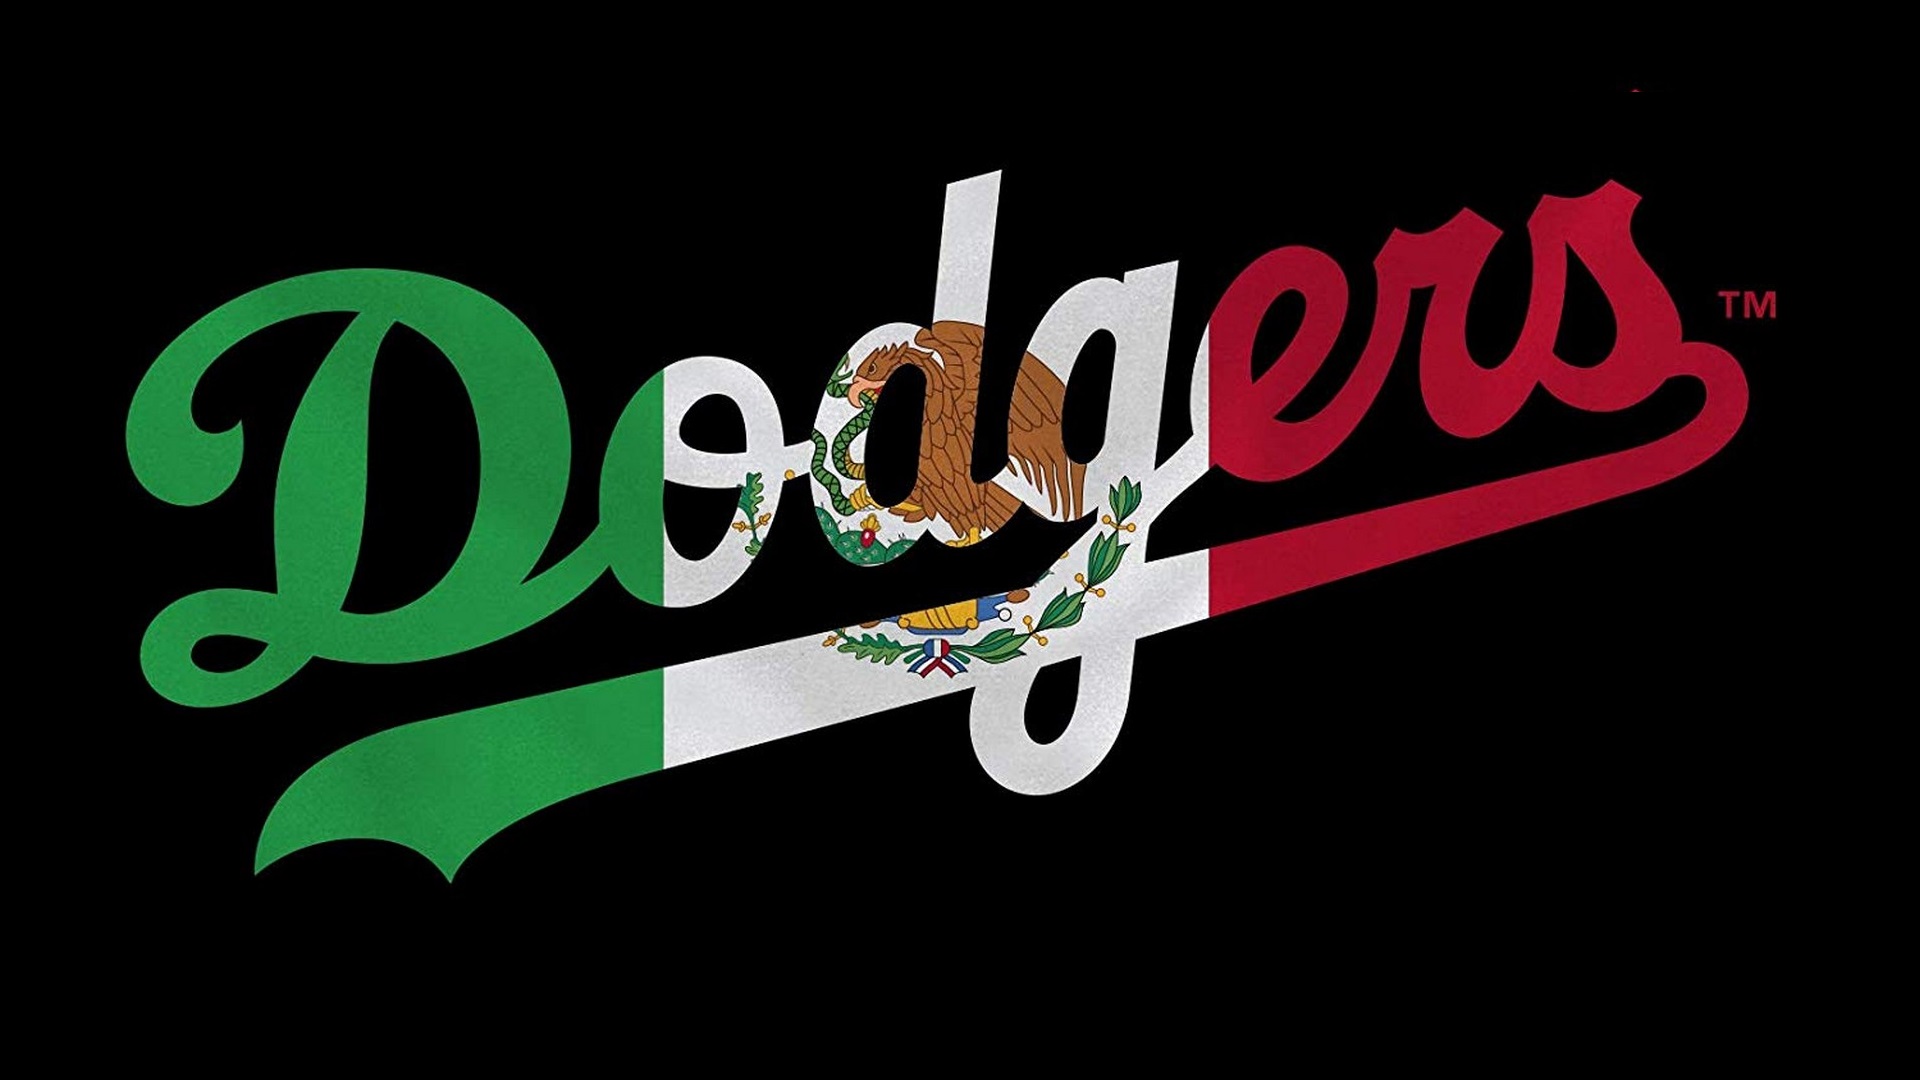 Los Angeles Dodgers Backgrounds HD With high-resolution 1920X1080 pixel. You can use this wallpaper for Mac Desktop Wallpaper, Laptop Screensavers, Android Wallpapers, Tablet or iPhone Home Screen and another mobile phone device